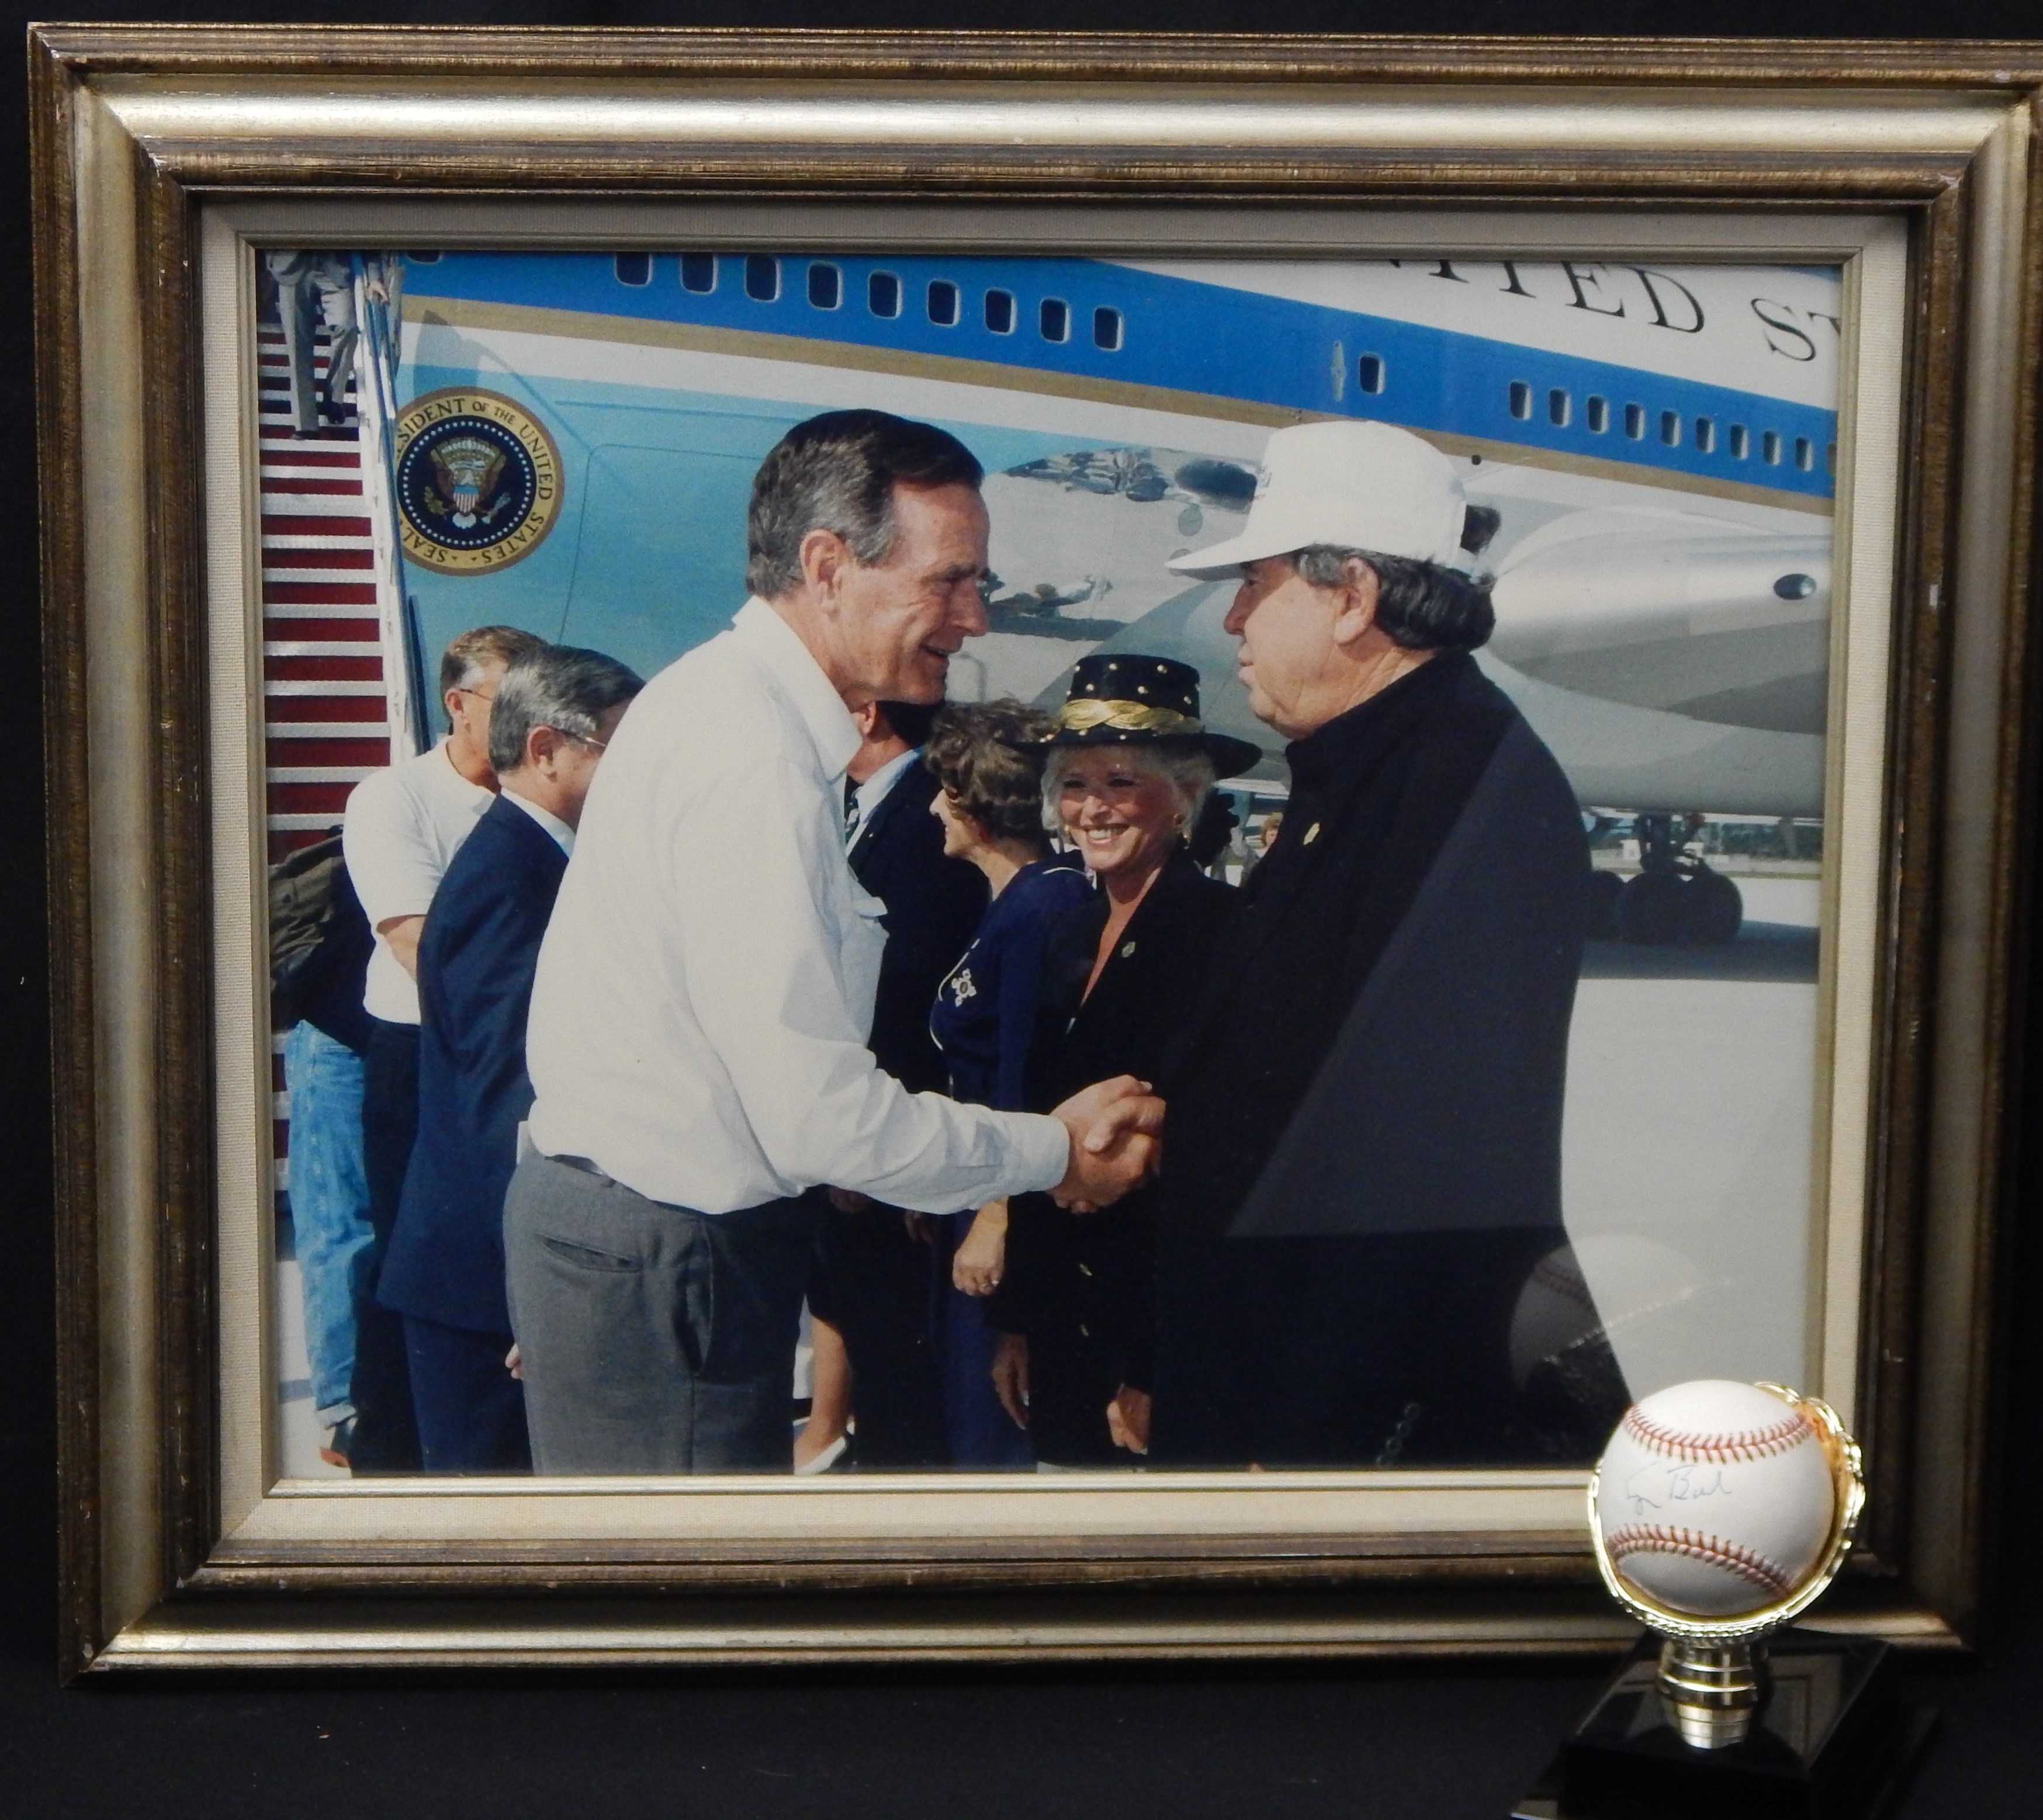 Presidential - George Bush Single Signed Baseball with Photograph